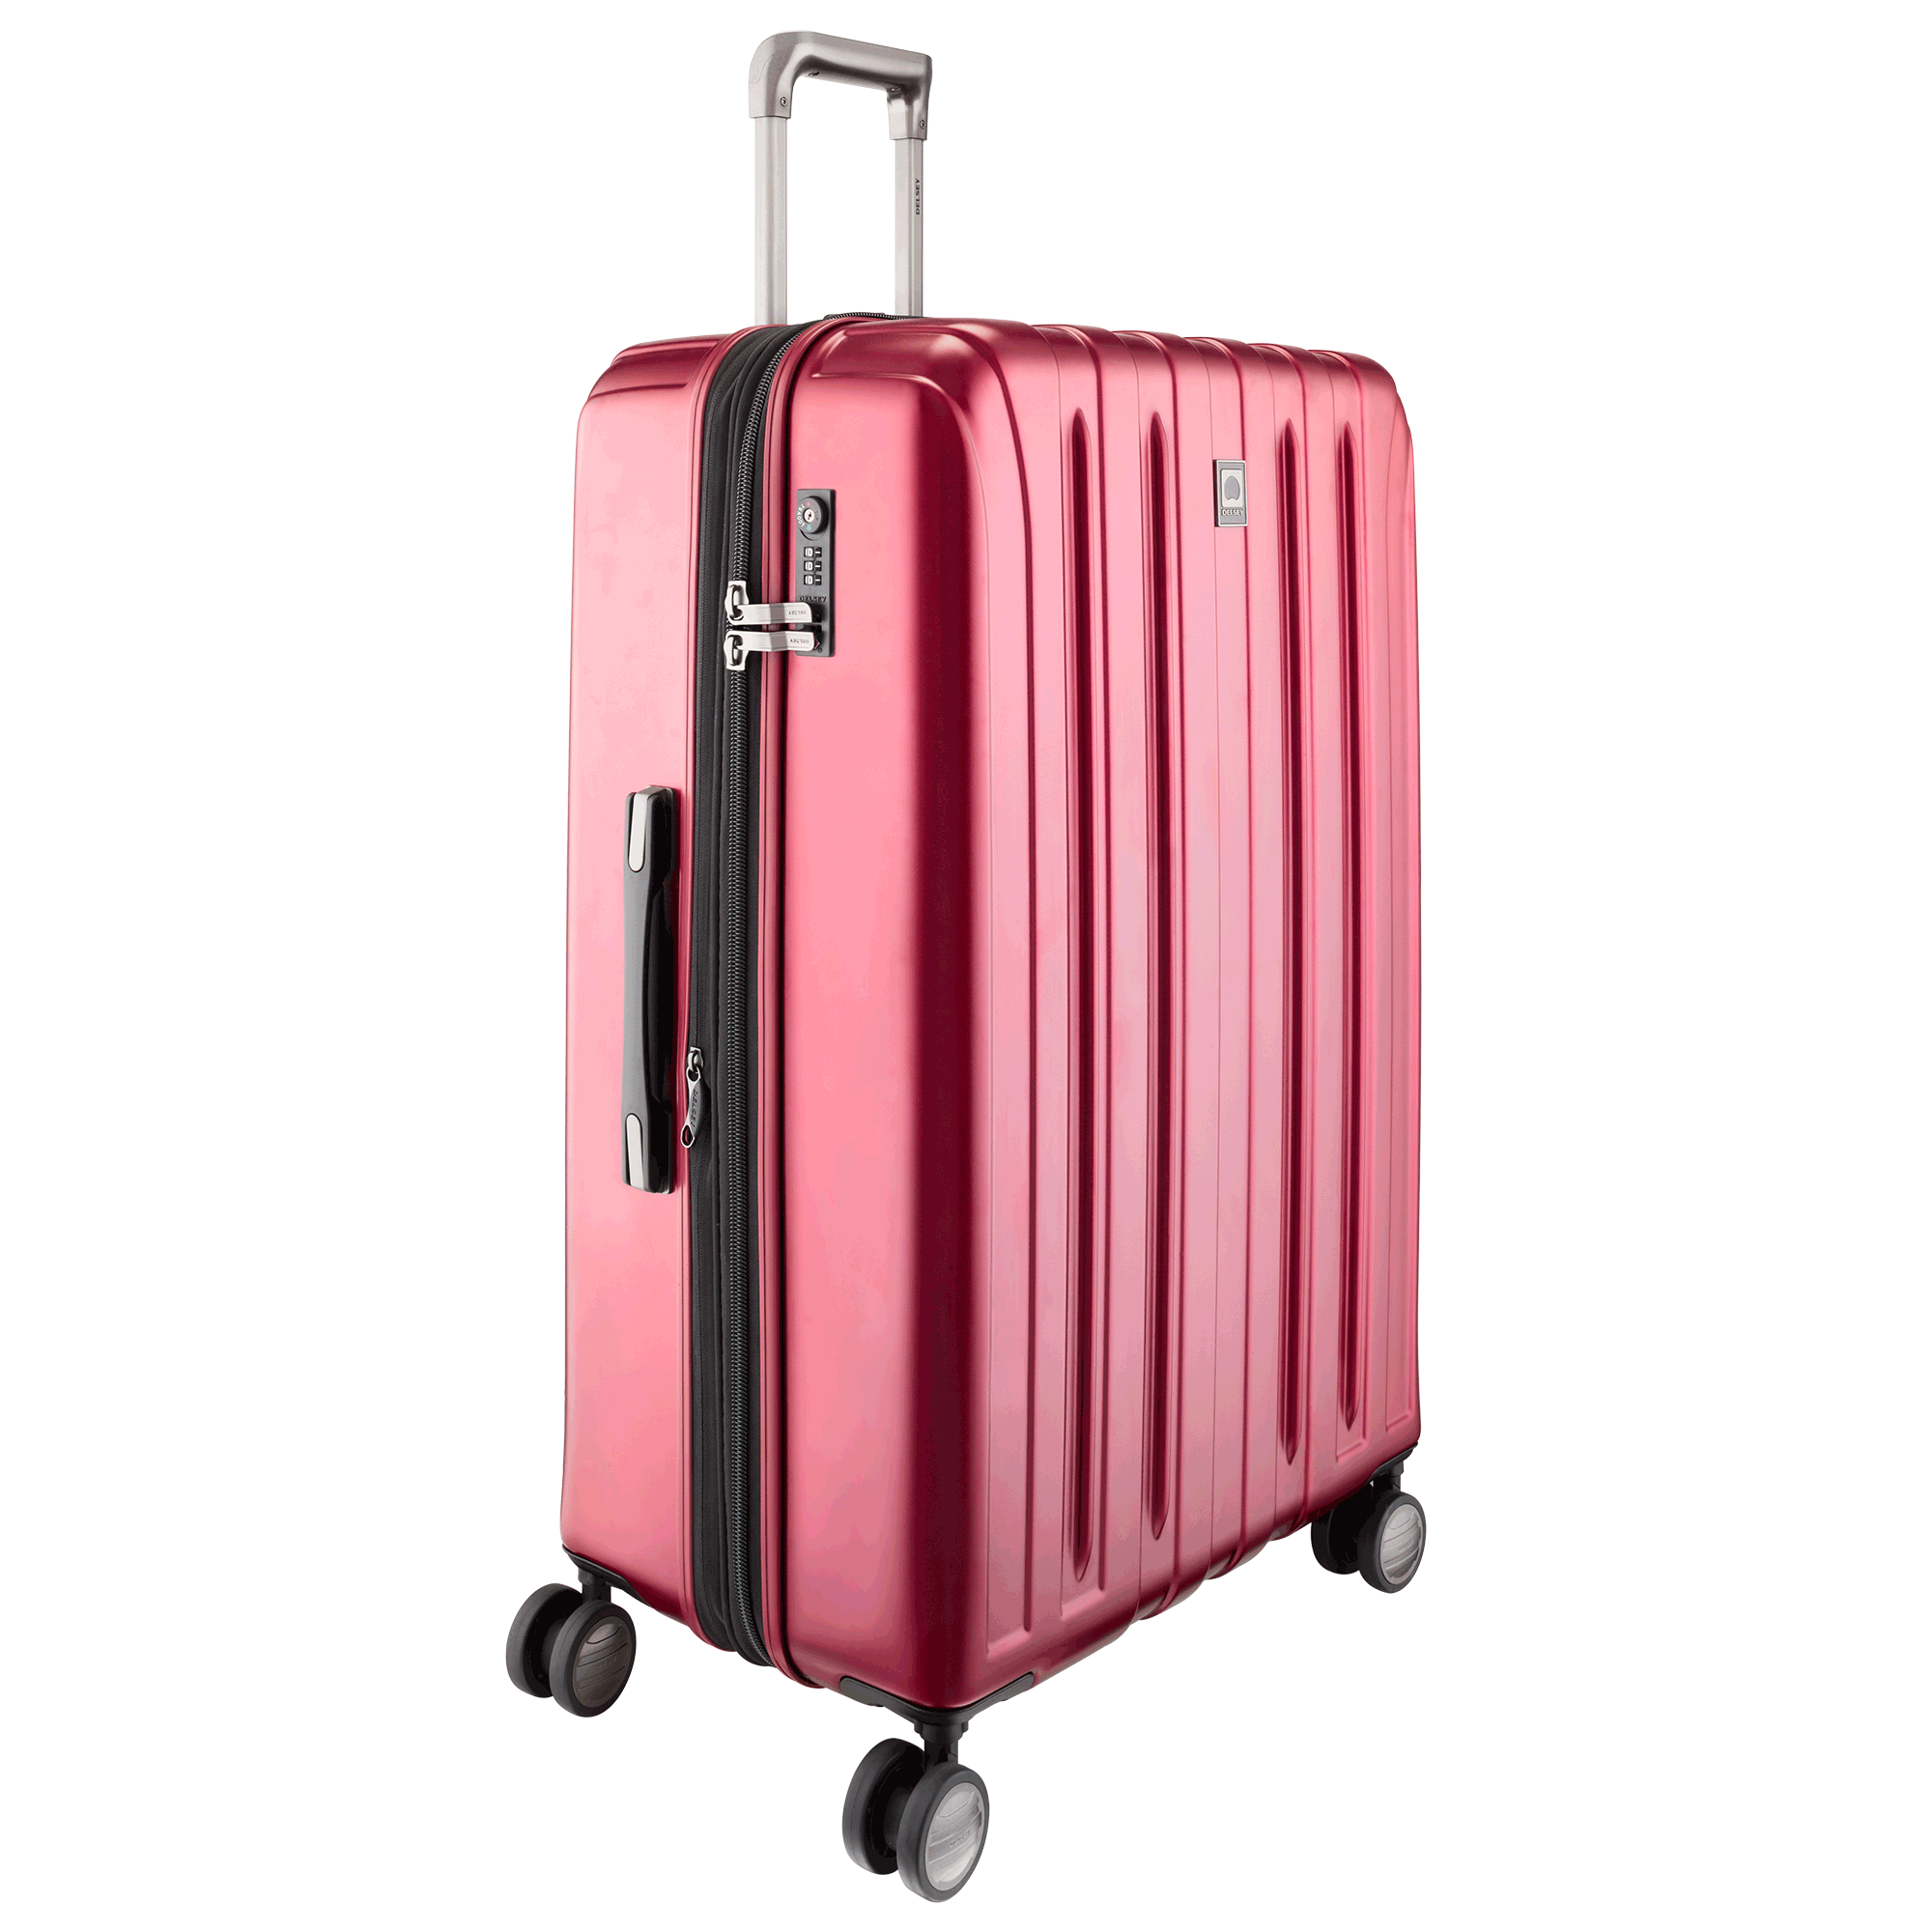 Delsey Vavin 82cm Hardcase 4 Double Wheel Check-In Luggage Trolley Red - 00207383004